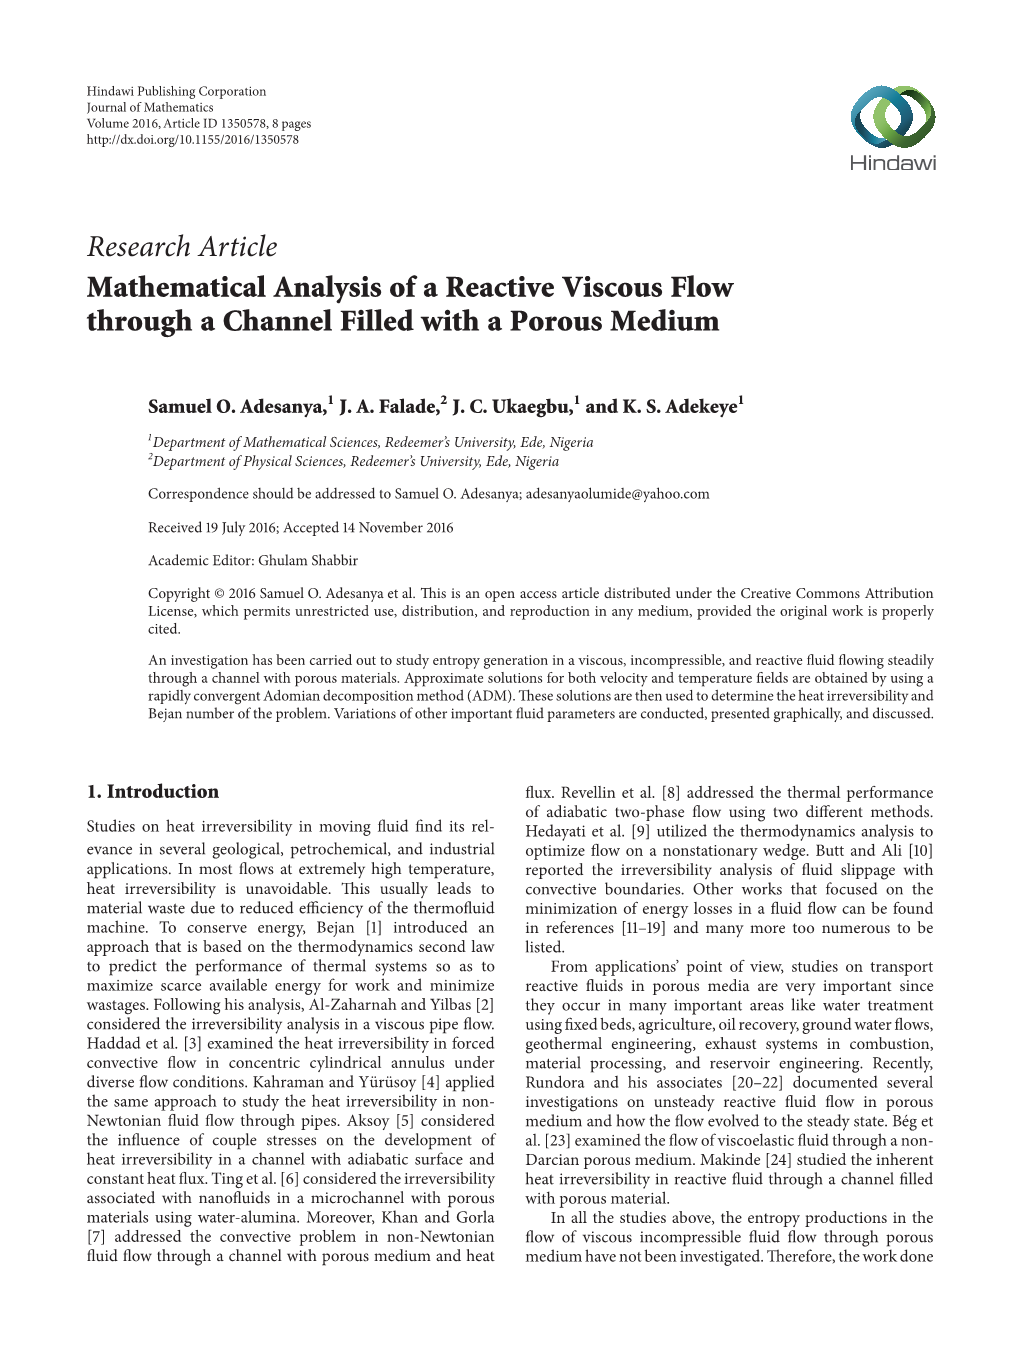 Research Article Mathematical Analysis of a Reactive Viscous Flow Through a Channel Filled with a Porous Medium